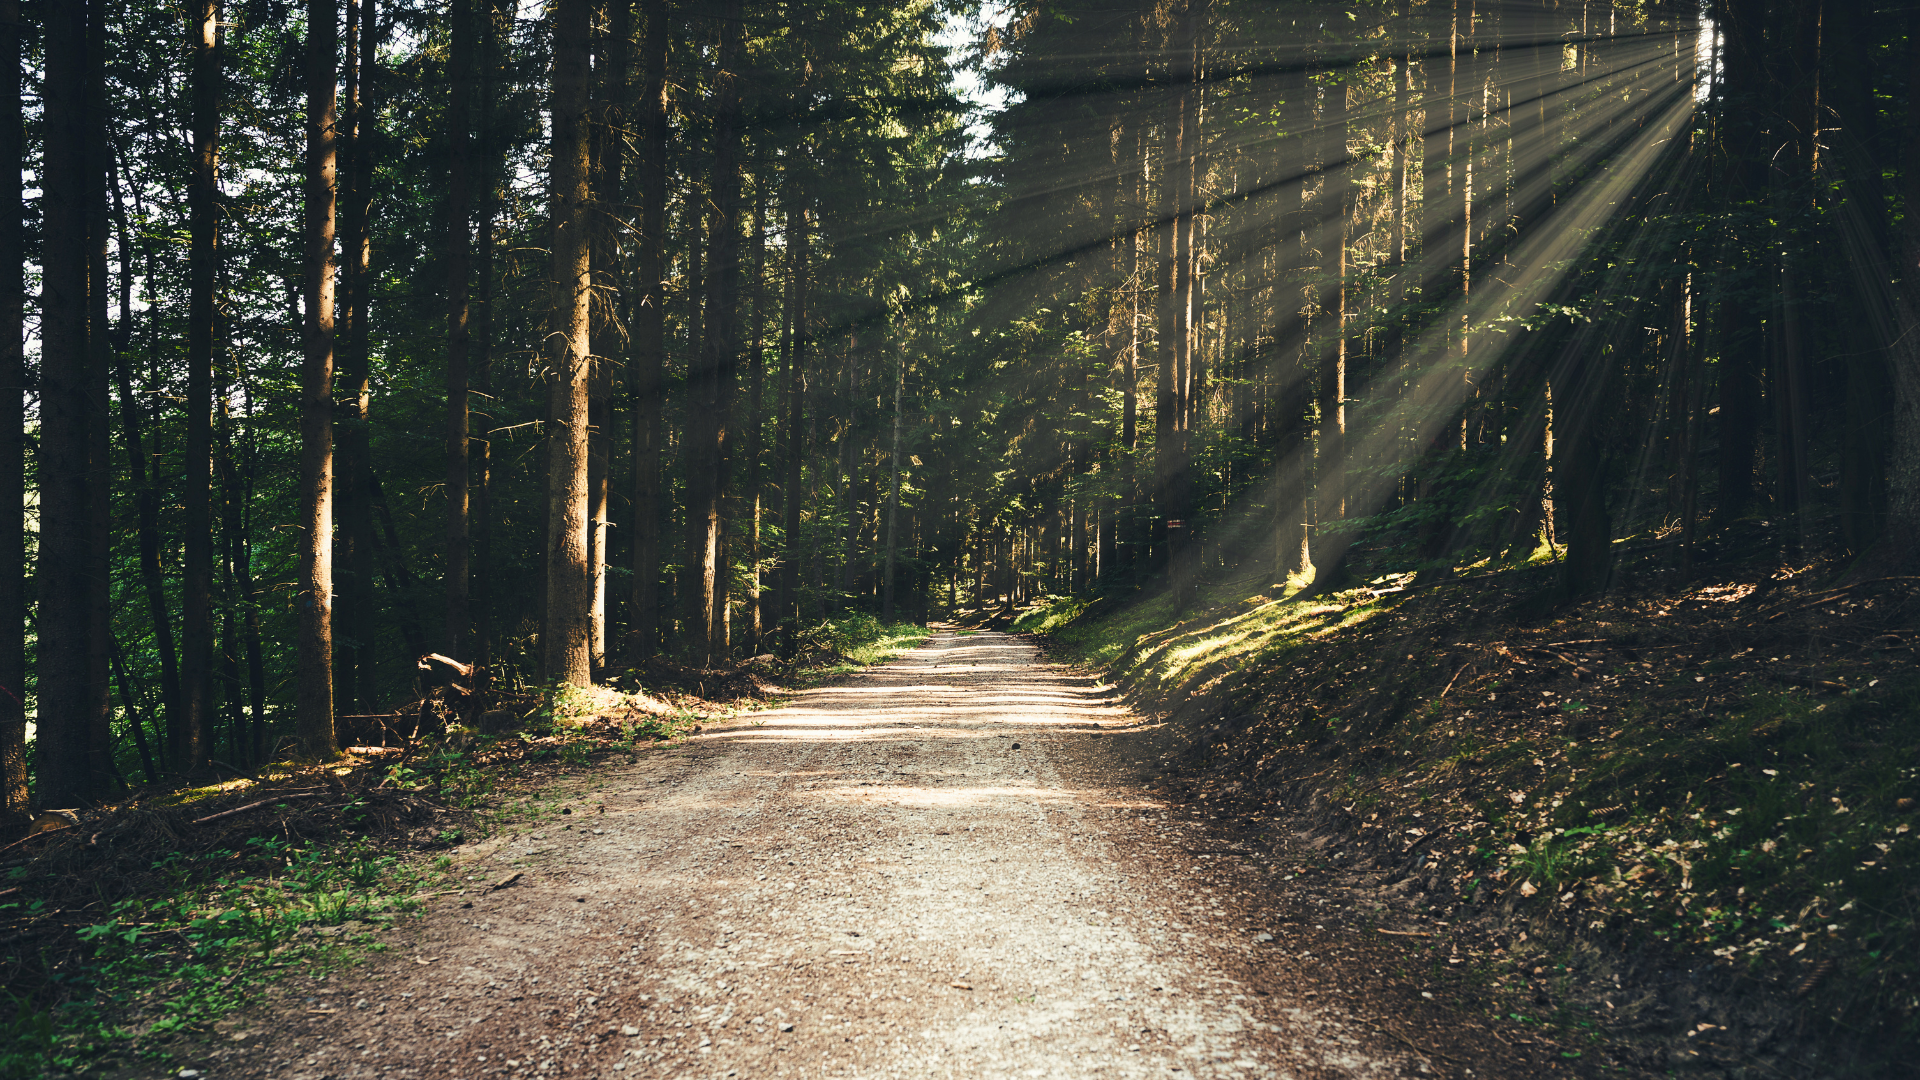 photo of a dirt road trailing off into the distance among tall trees. There is a bit of light shining through the trees. Header says "Money & My Identity Workbook" Subheader says "A financial wellness guide that considers all parts of you" below is the download button 